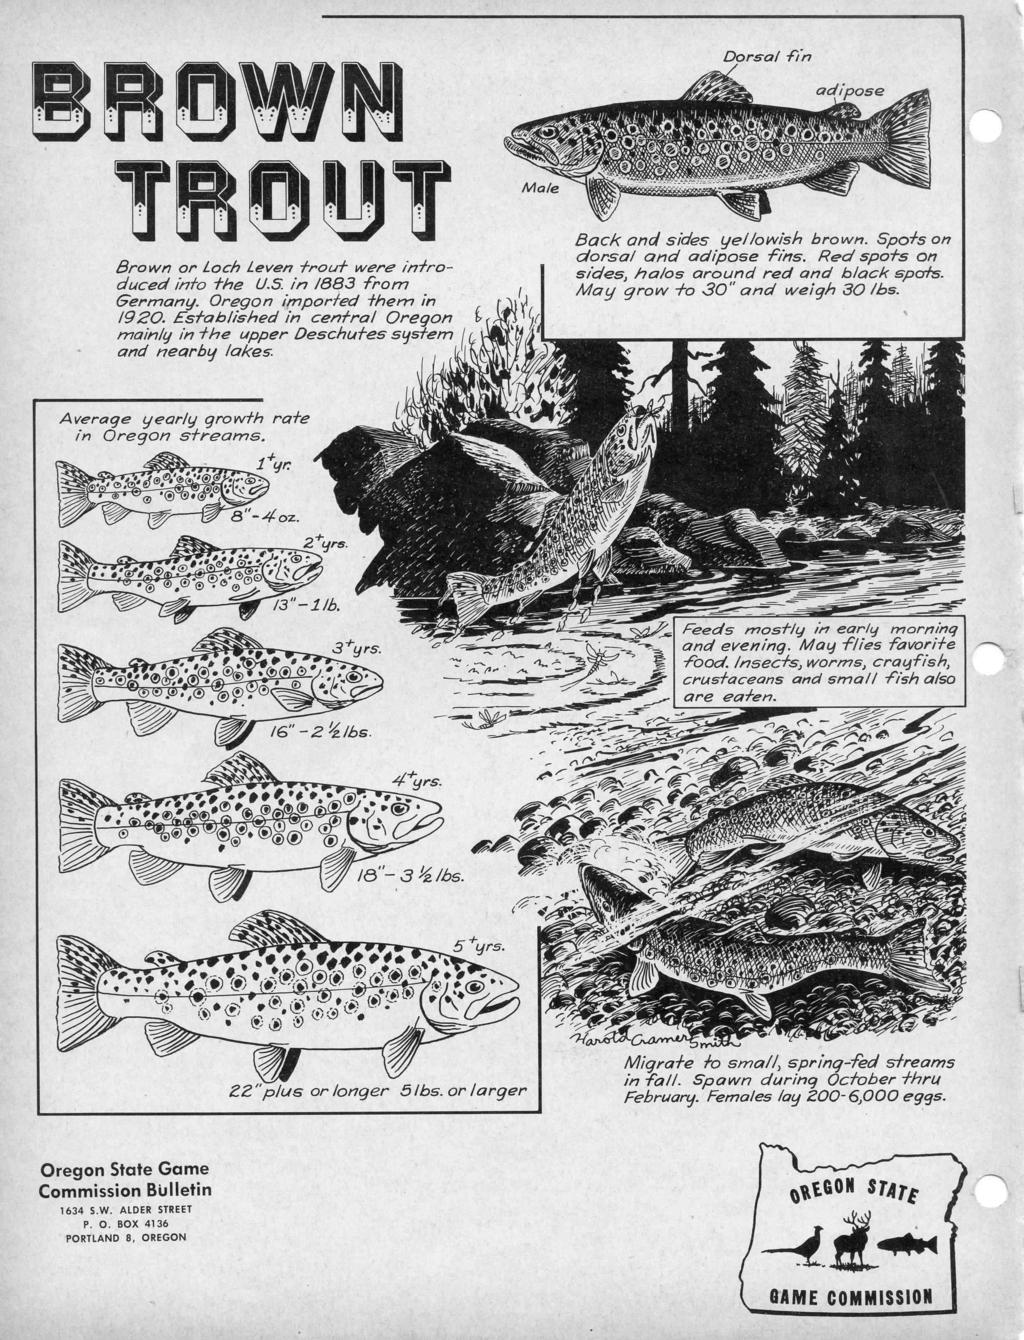 Dorsal fin rj Brown or Loch Leven trout were introduced into the U.S. in /883 from Germany. Oregon imported them in /920.